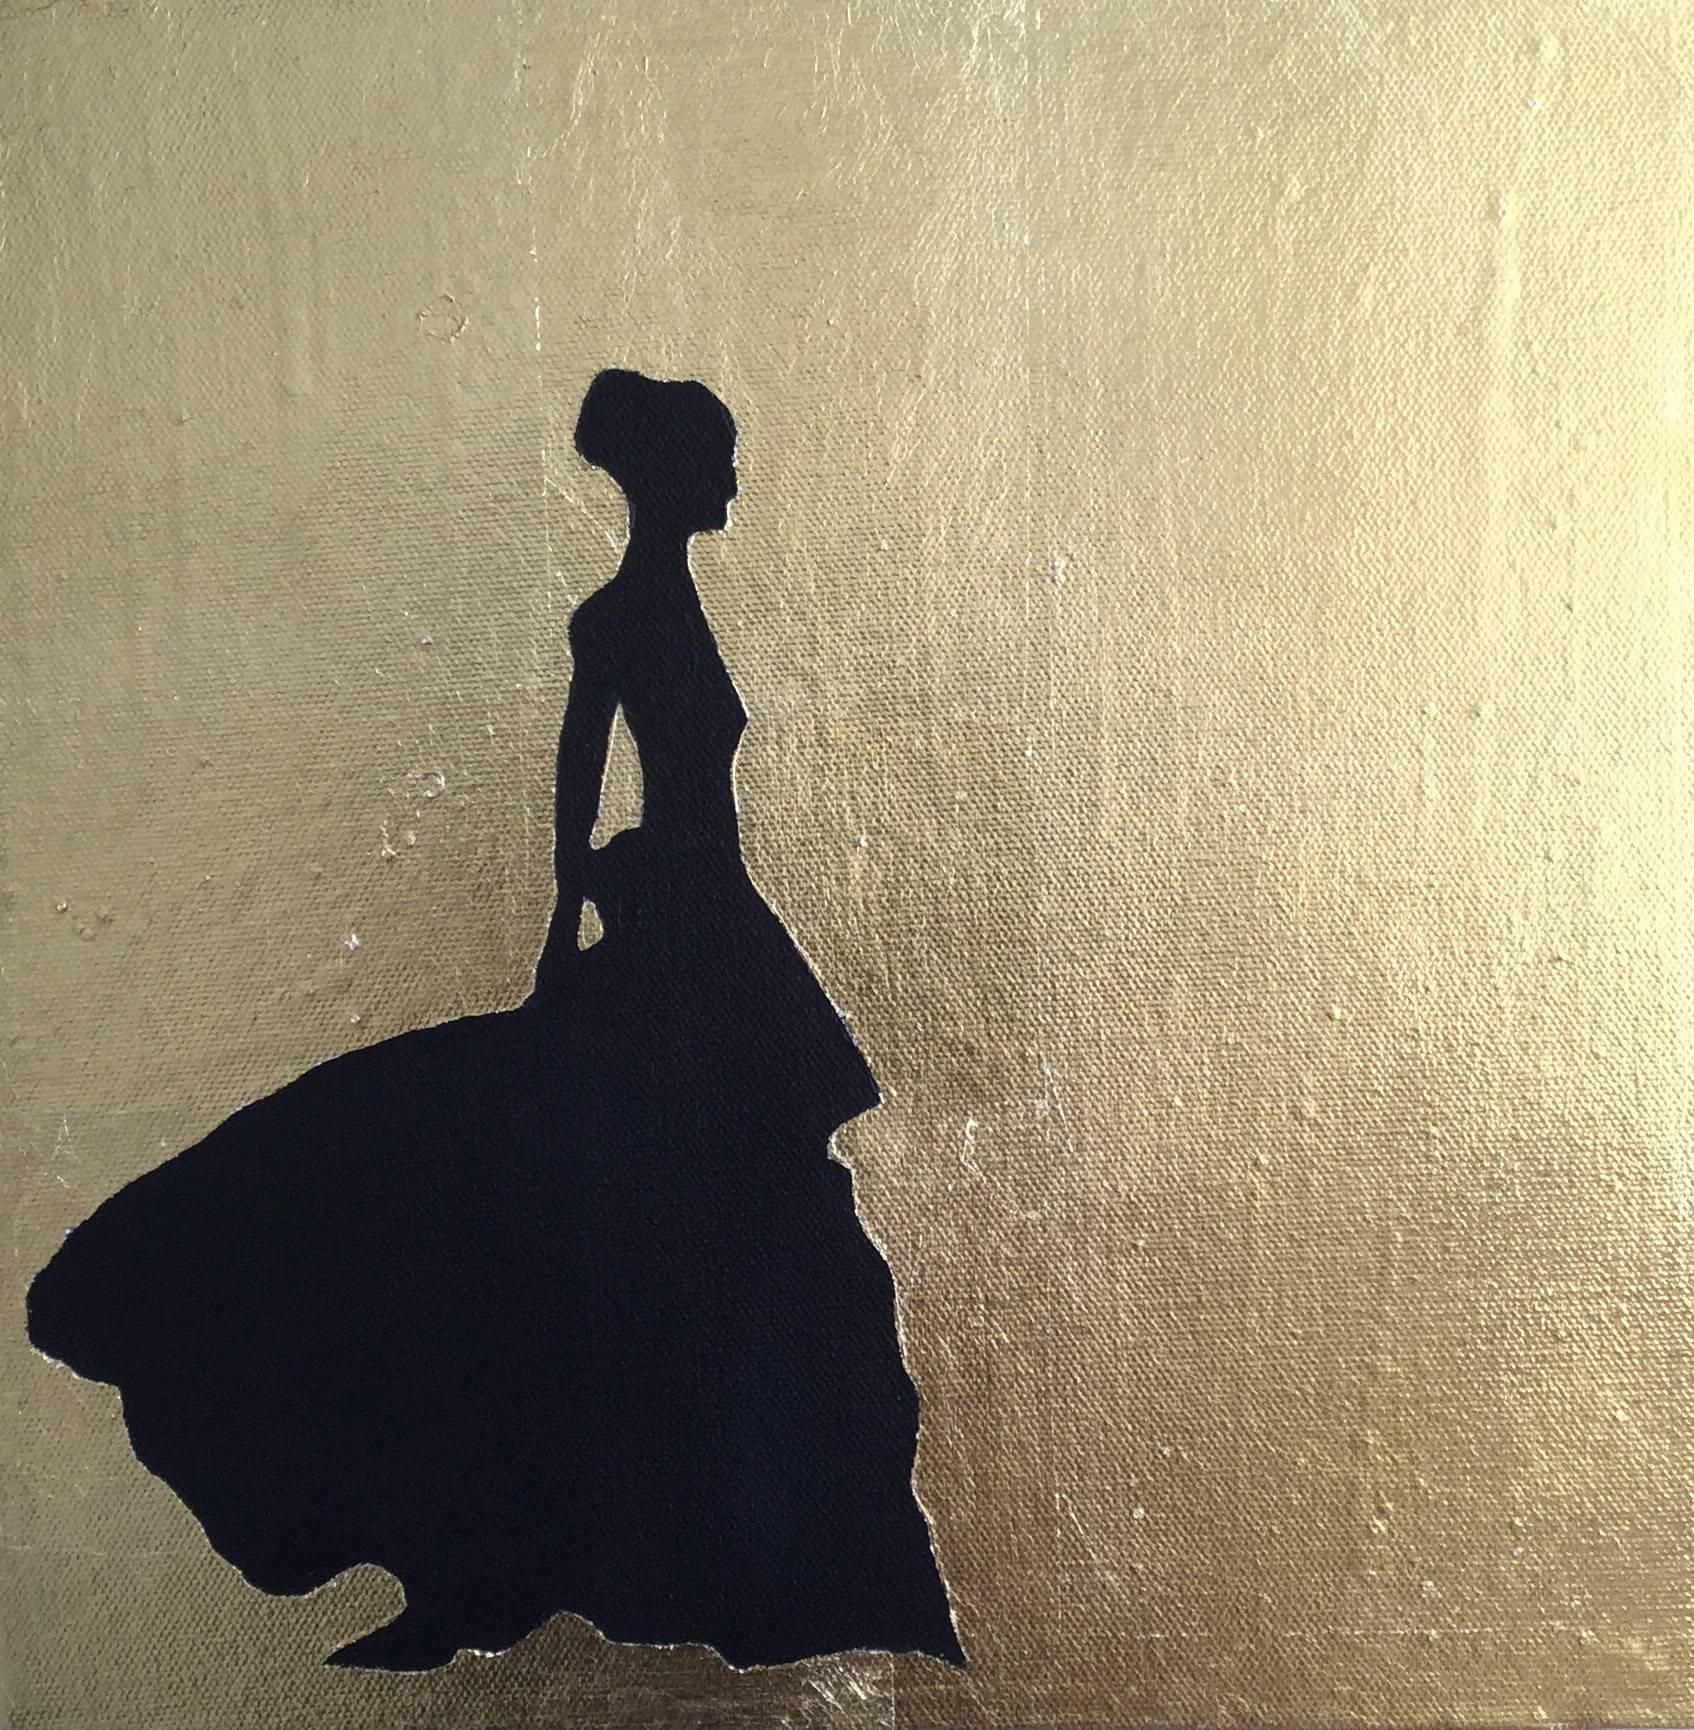 Silhouette, 4 paintings - Painting by K. Odal